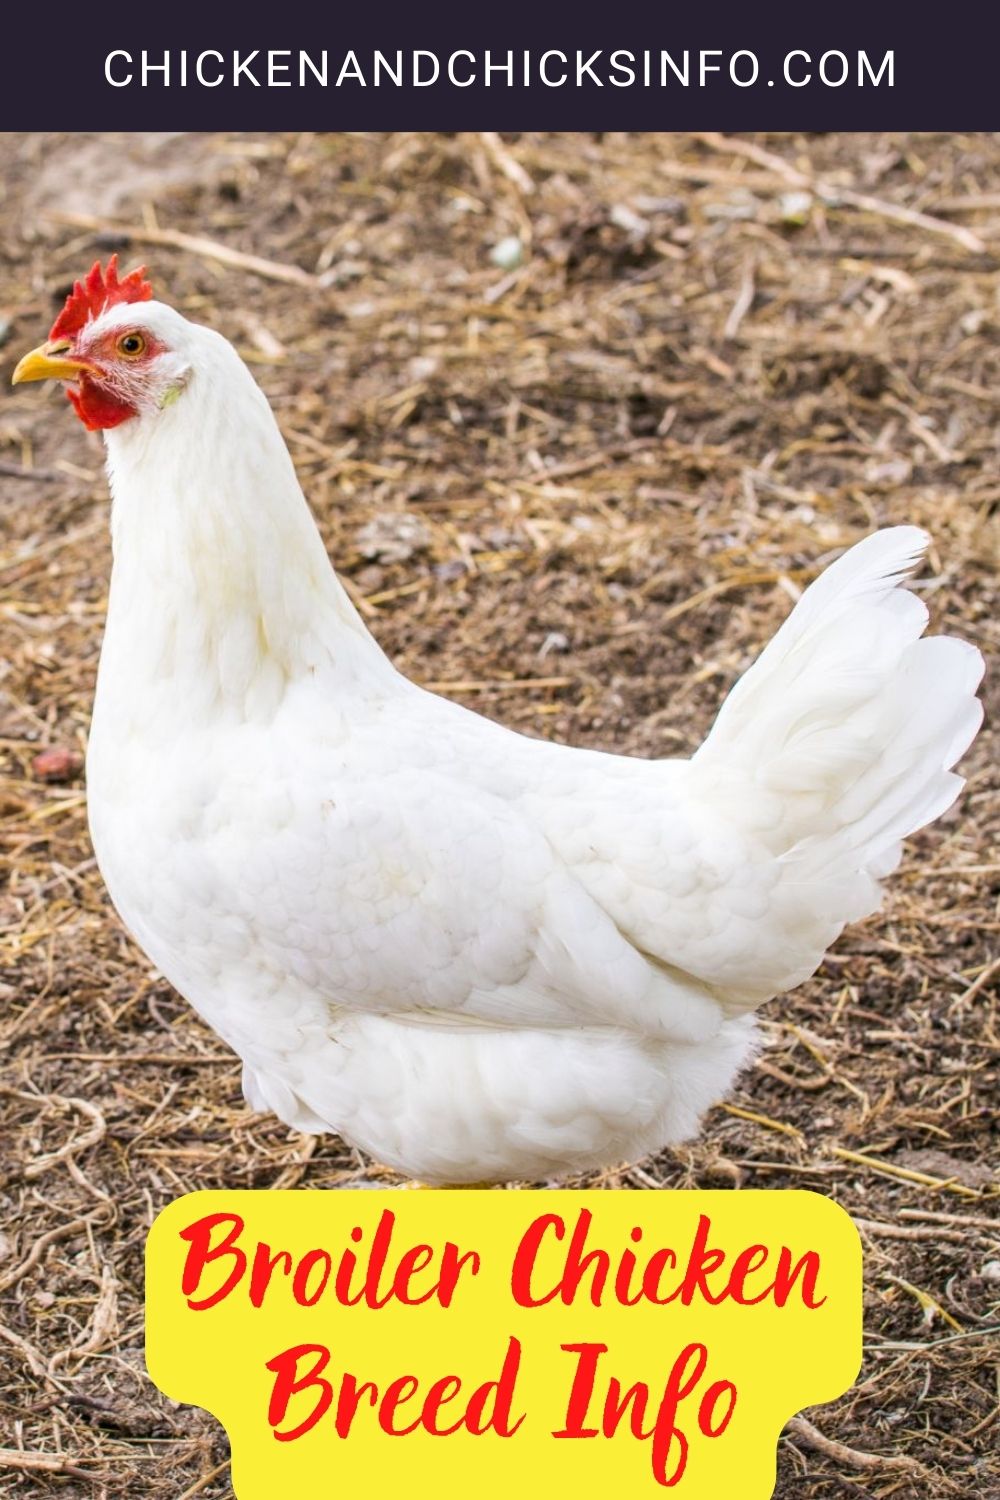 Broiler Chicken Breed Info + Where to Buy pinterest image.